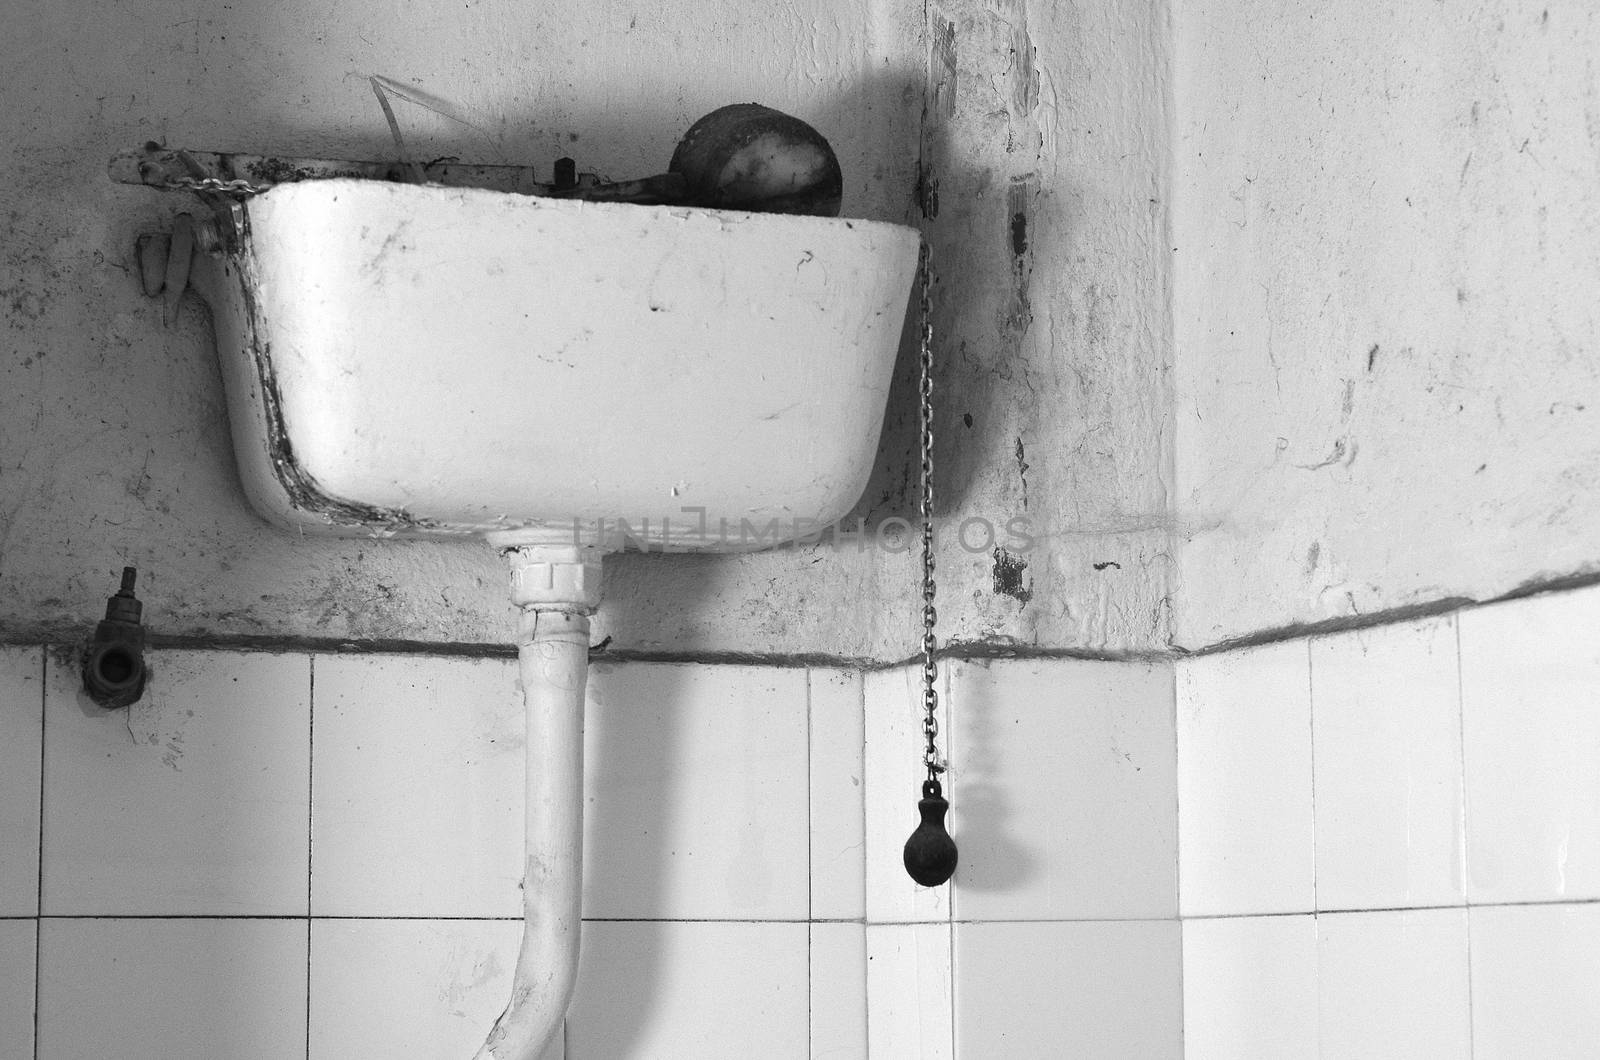 Dirty old flush toilet mechanism black and white theme